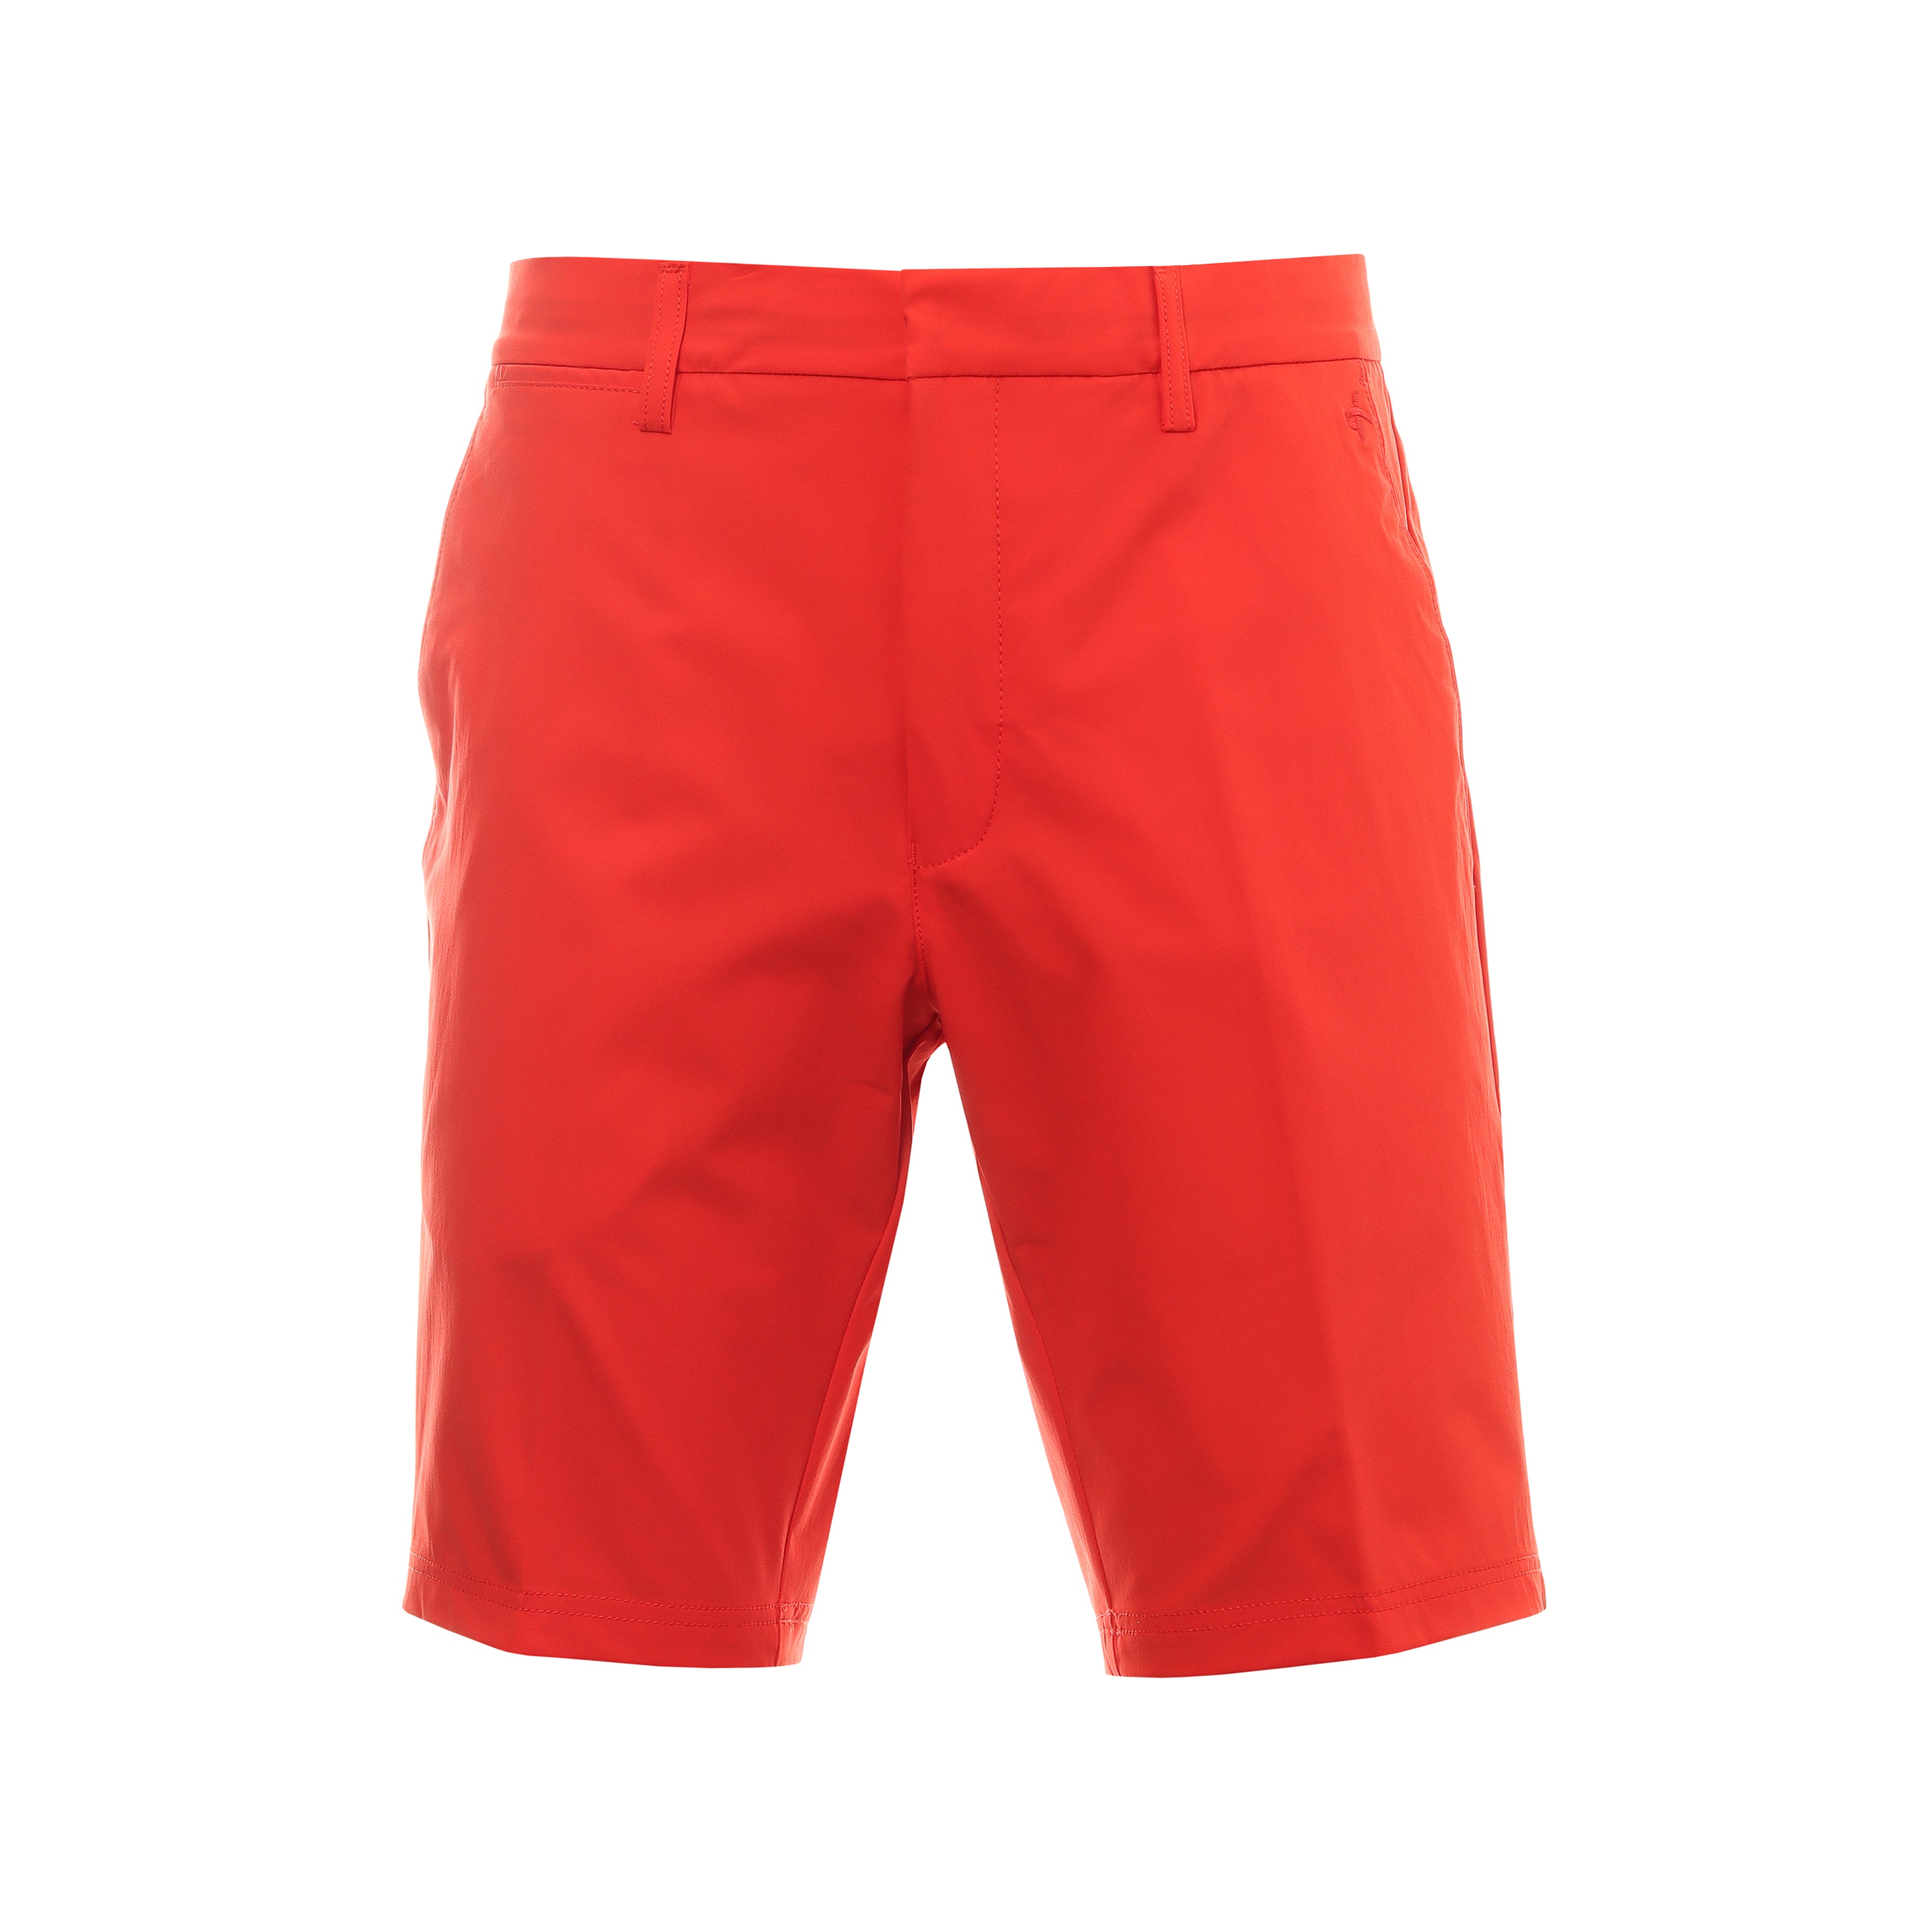 Cross Byron Lux Golf Shorts 1210400 Flame Scarlet 347 & Function18 ...